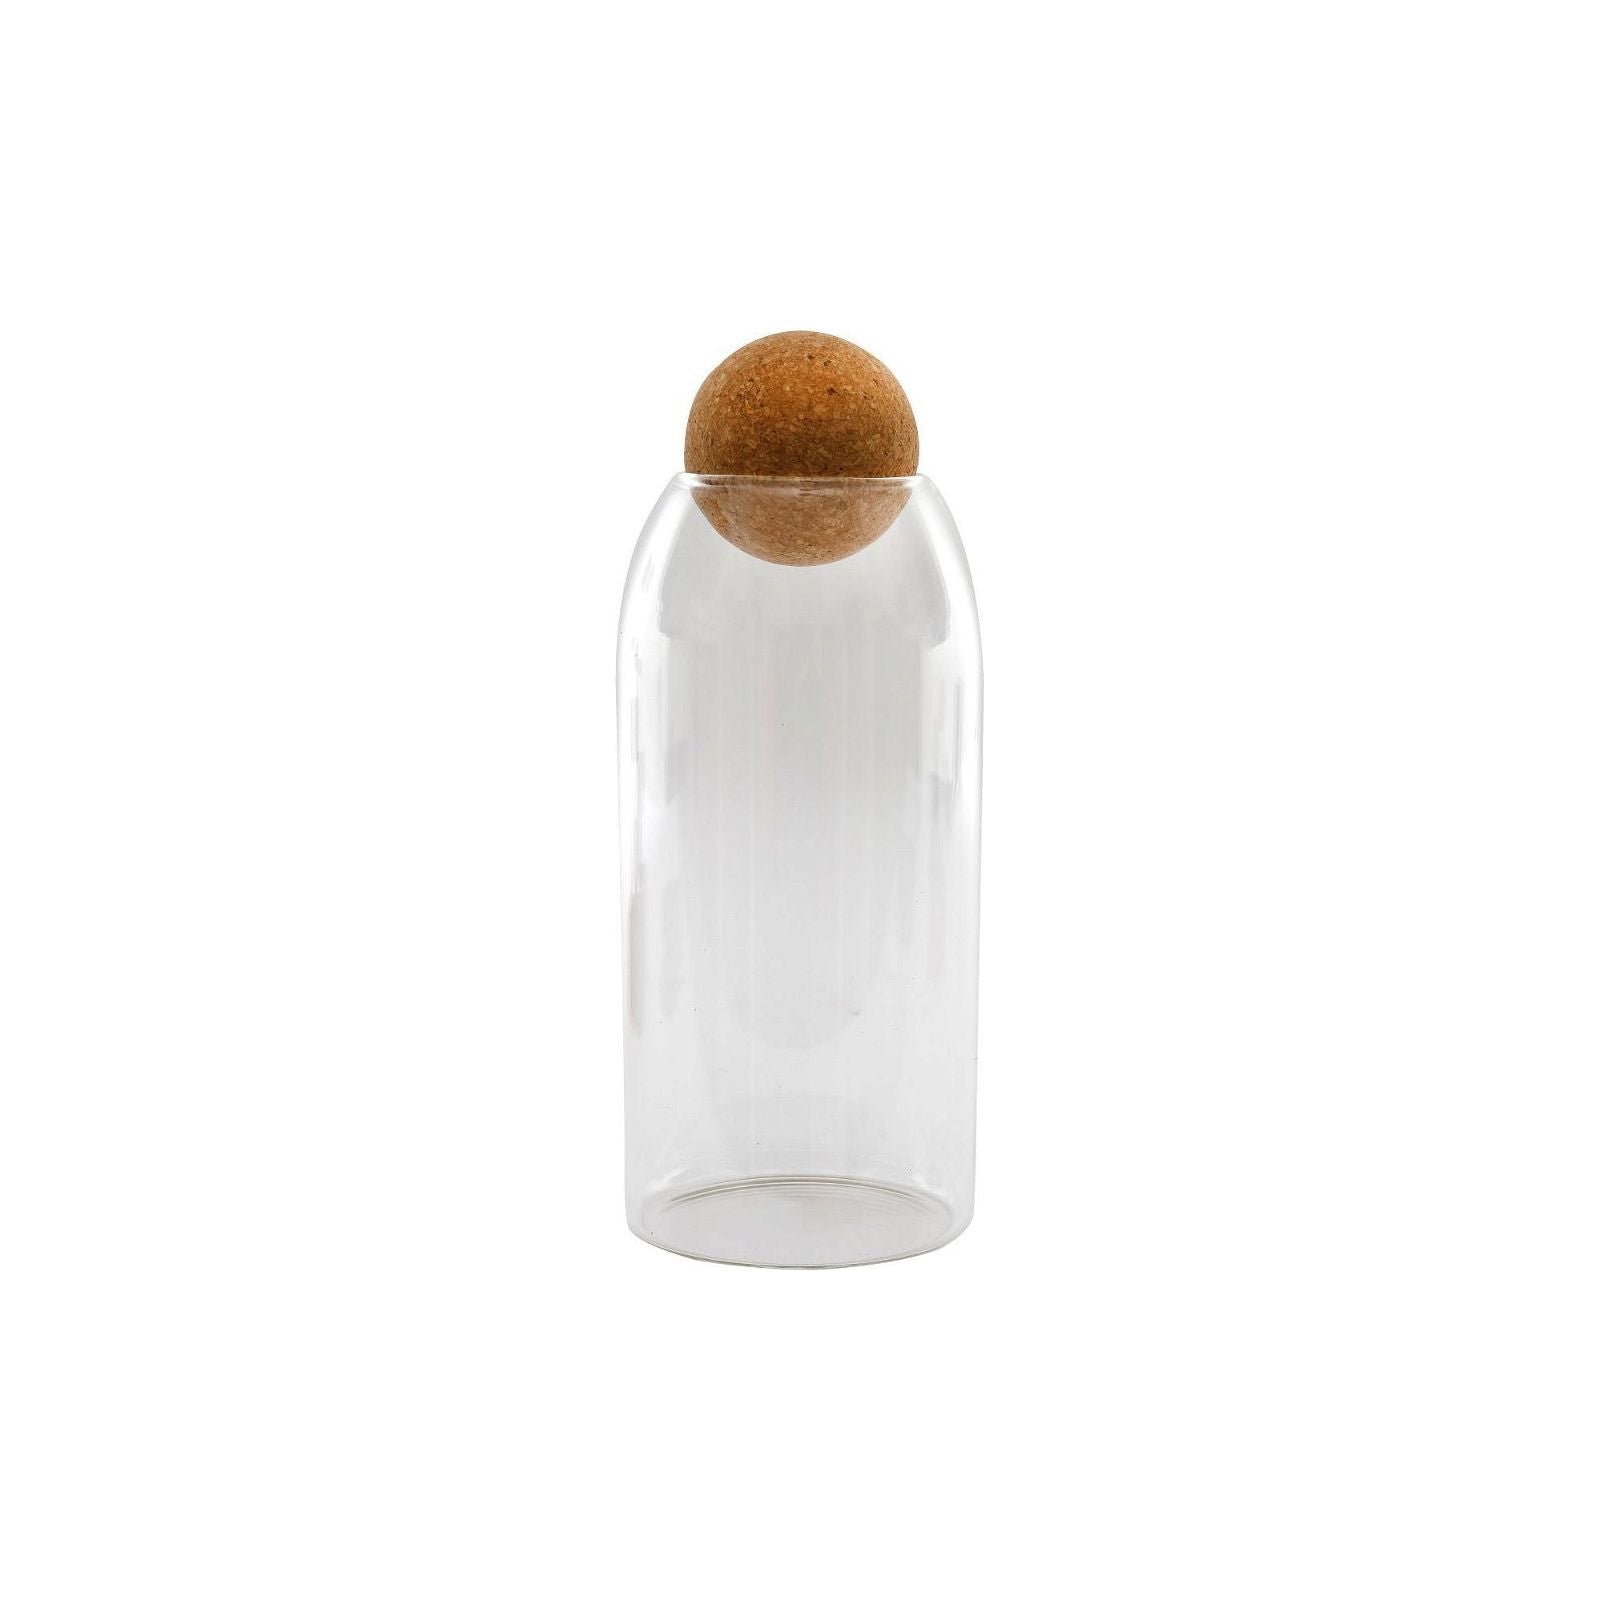 Glass Canister With Cork Stopper 26cm - Ashton and Finch